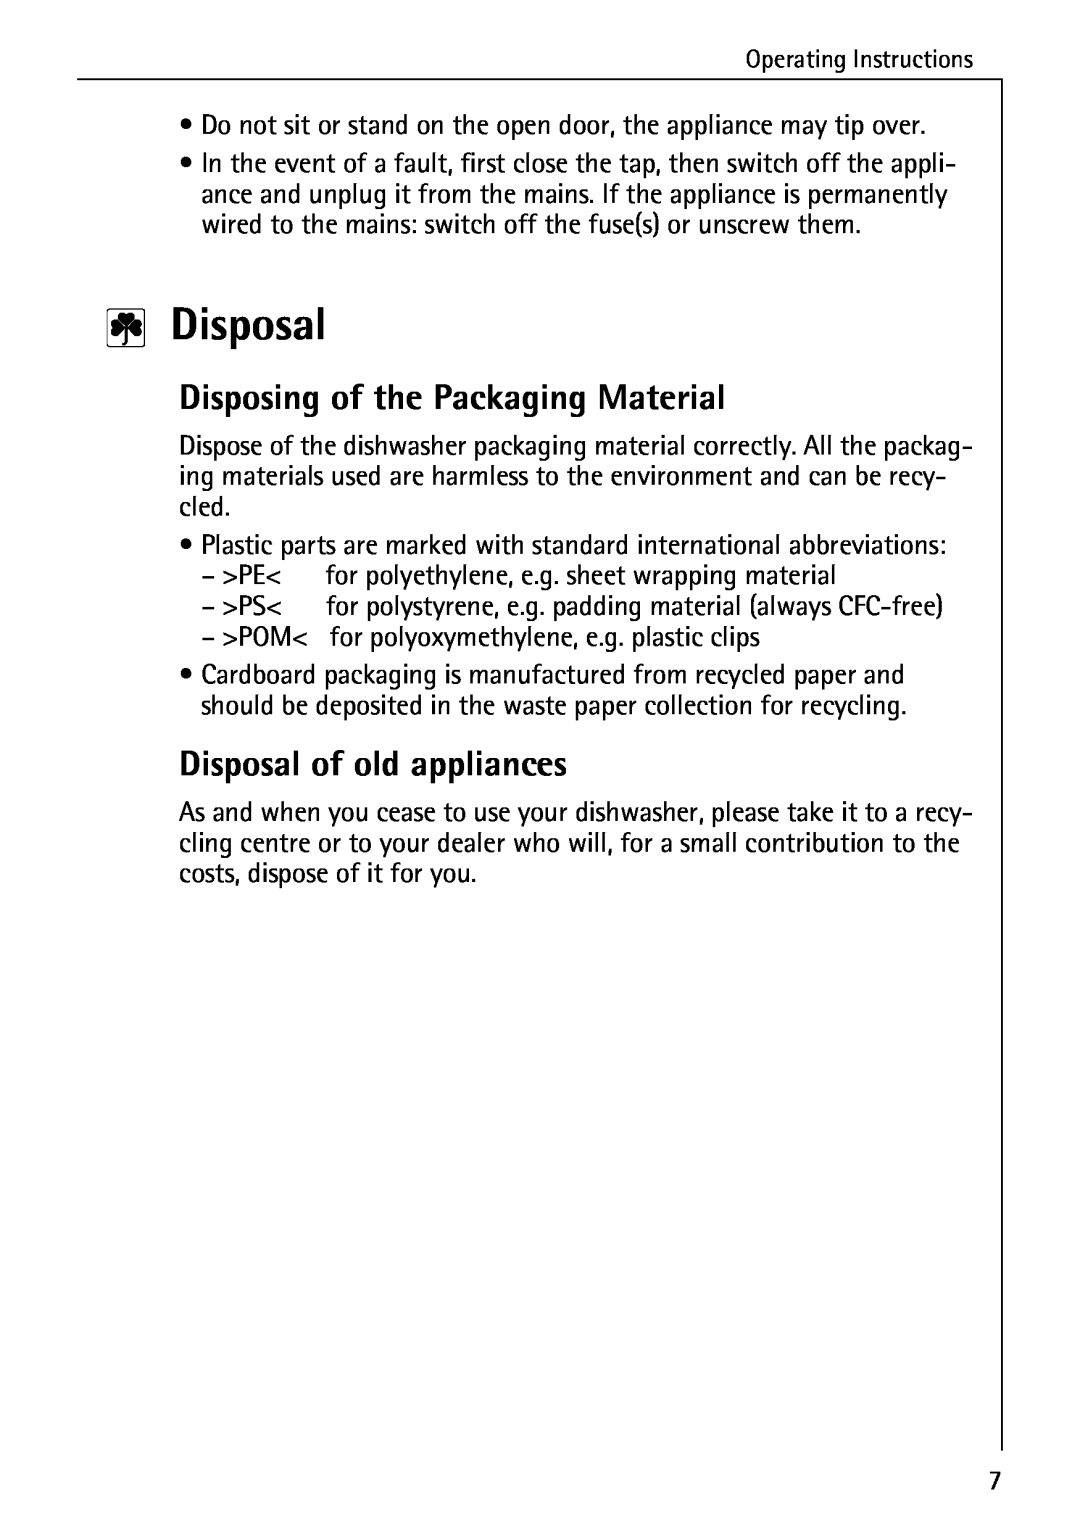 AEG 80800 manual Disposing of the Packaging Material, Disposal of old appliances 